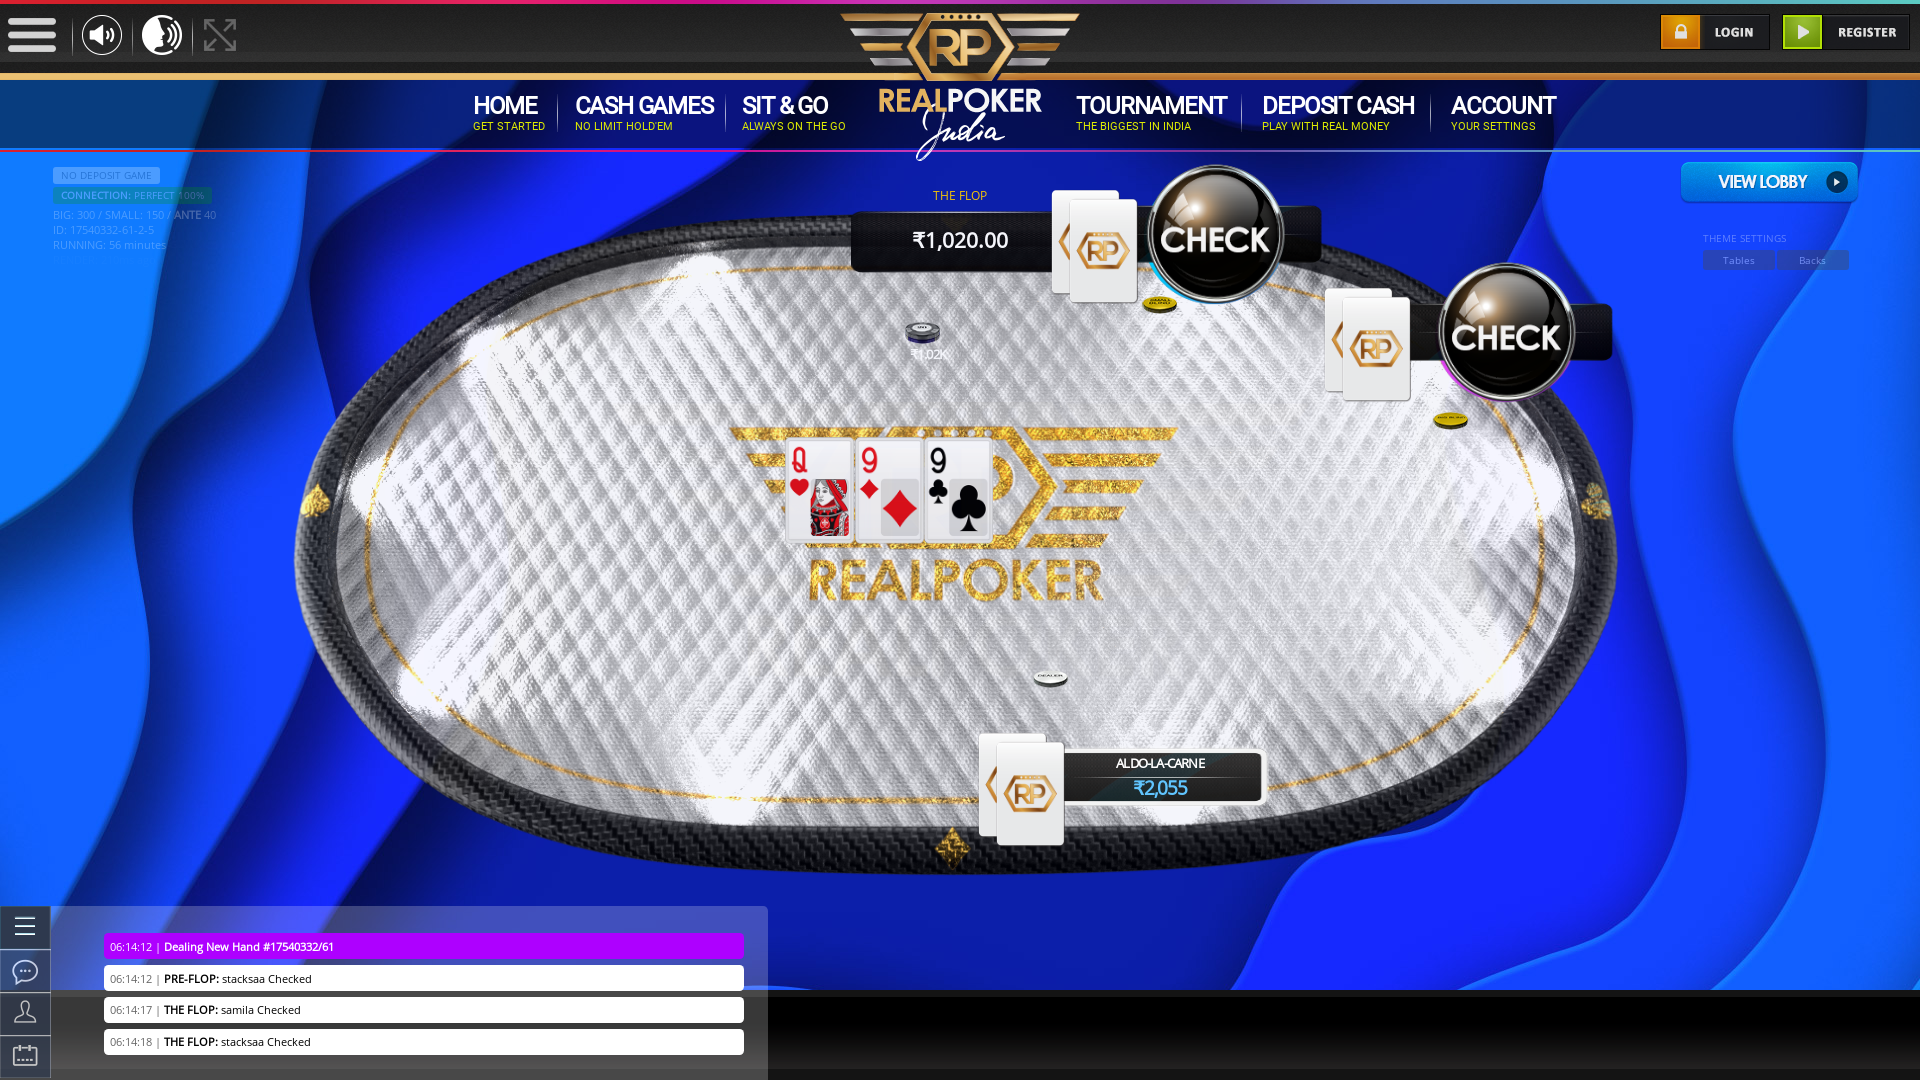 Lower Parel, Mumbai online poker game on a 10 player table in the 56th minute of the game